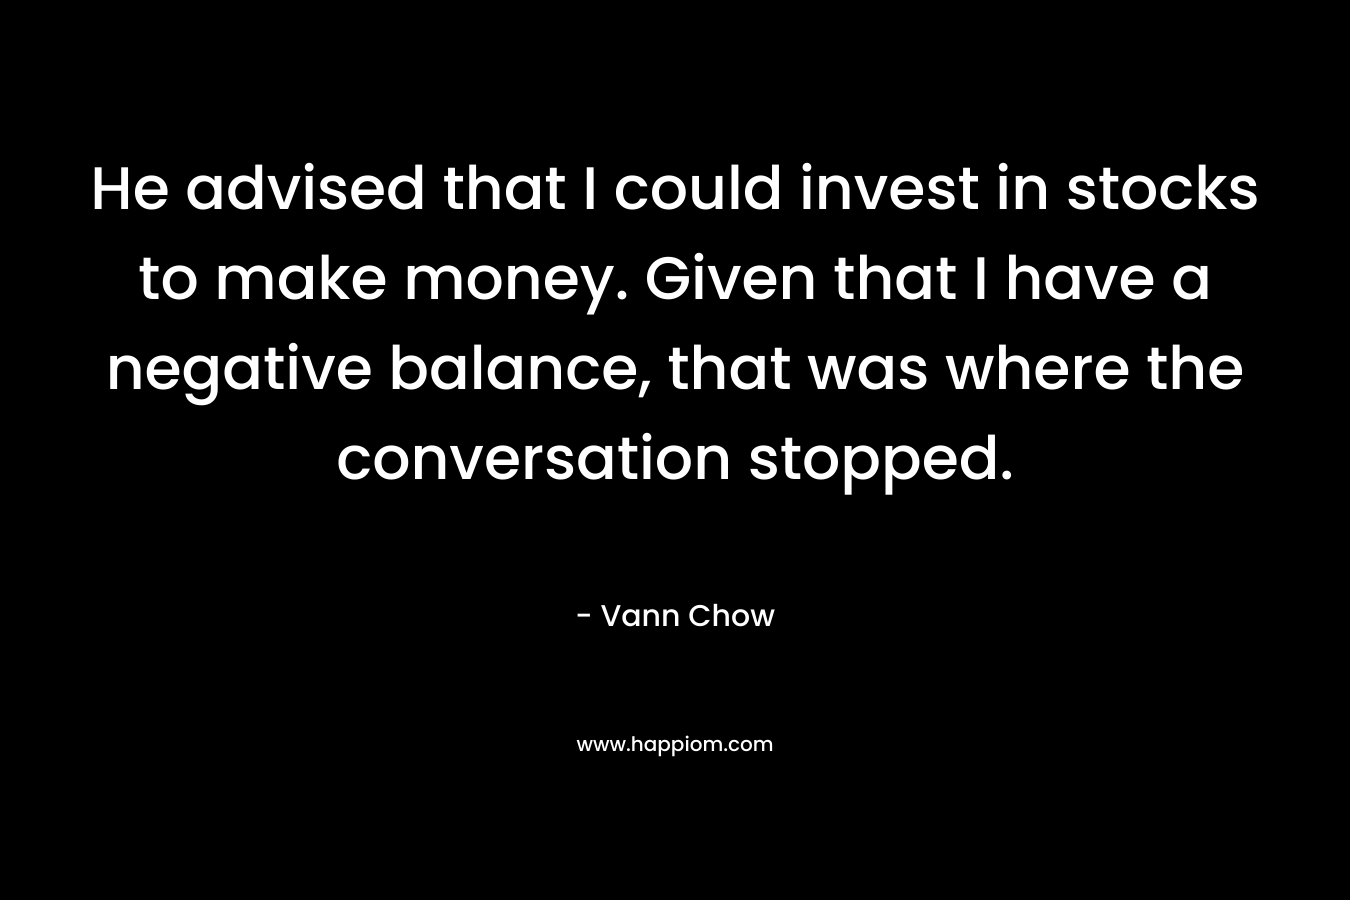 He advised that I could invest in stocks to make money. Given that I have a negative balance, that was where the conversation stopped.